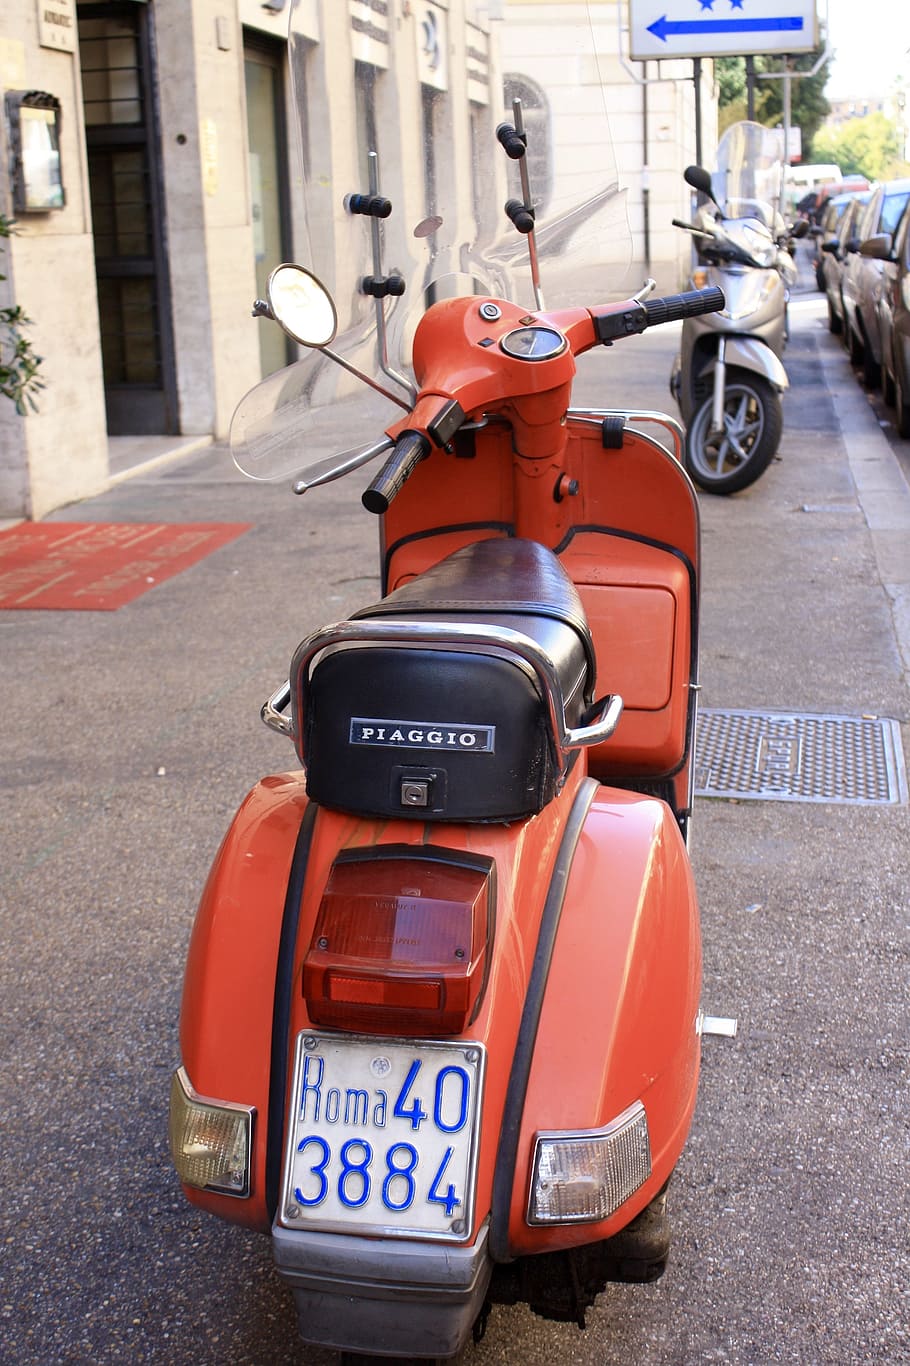 italy, rome, downtown, motor scooter, piaggio, vespa, p 200 e, old, red, mode of transportation